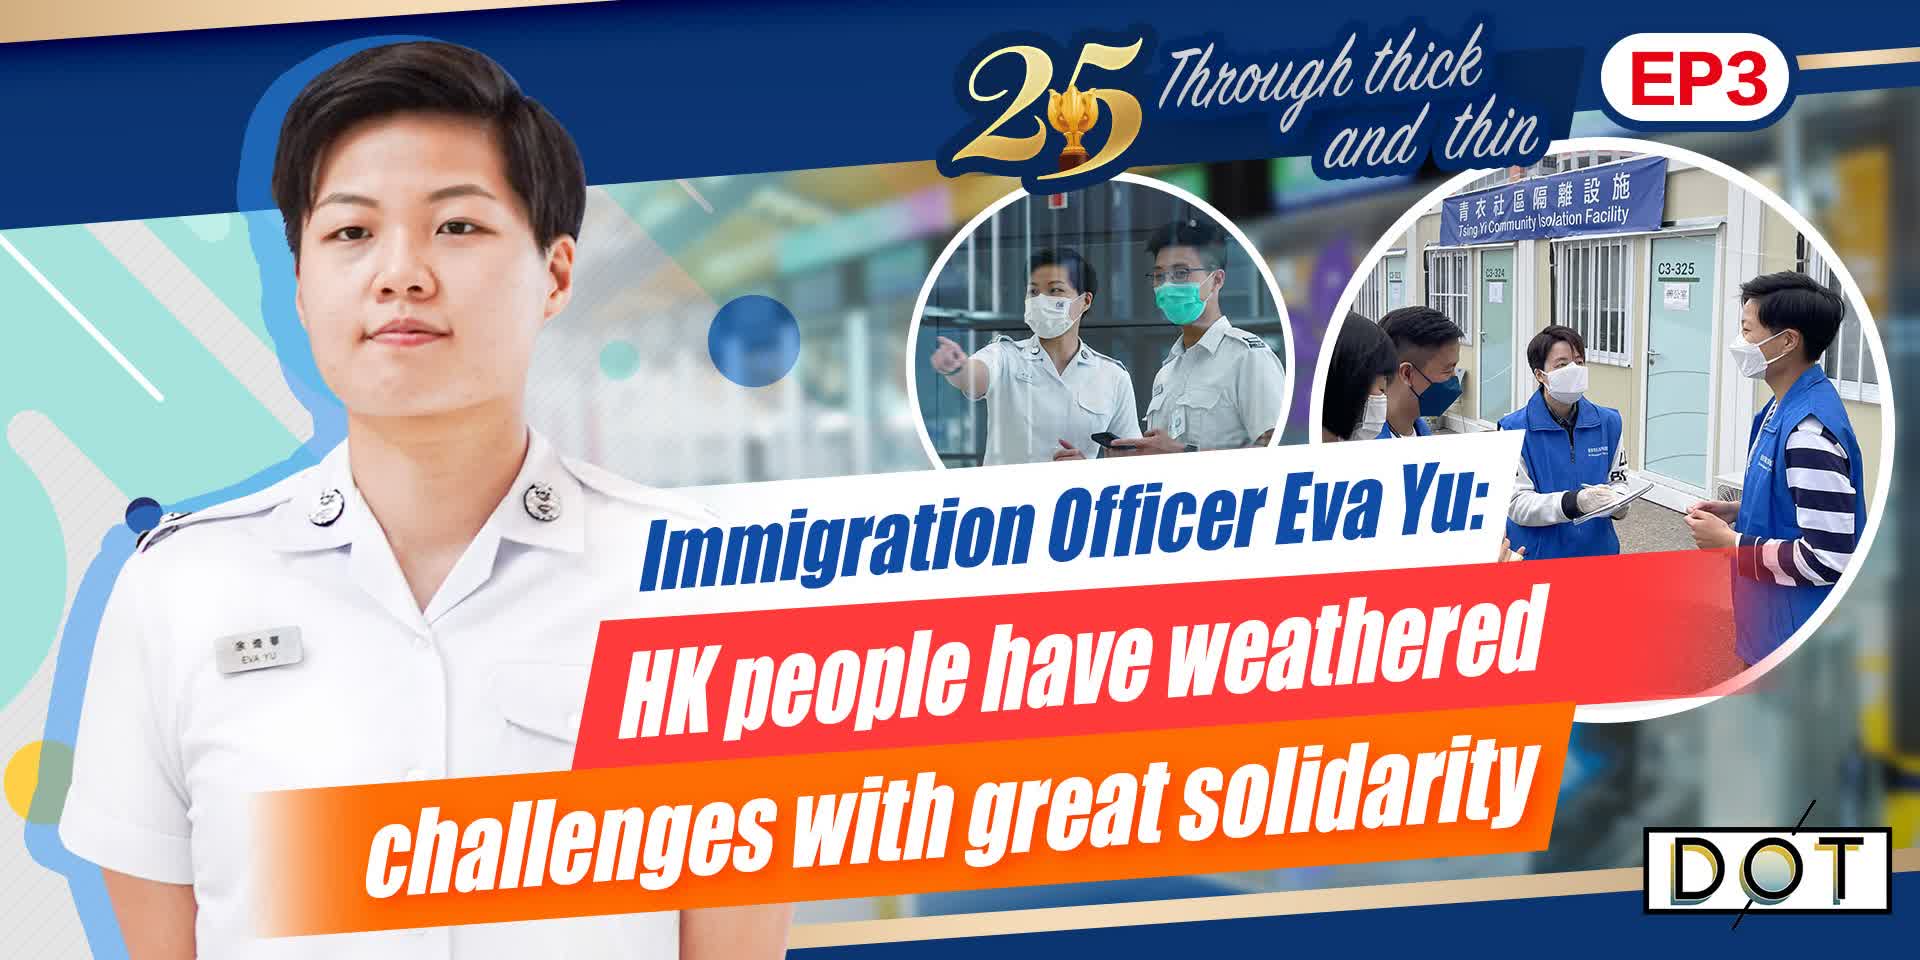 25 · Through thick and thin | Immigration Officer Eva Yu: HK people have weathered challenges with great solidarity